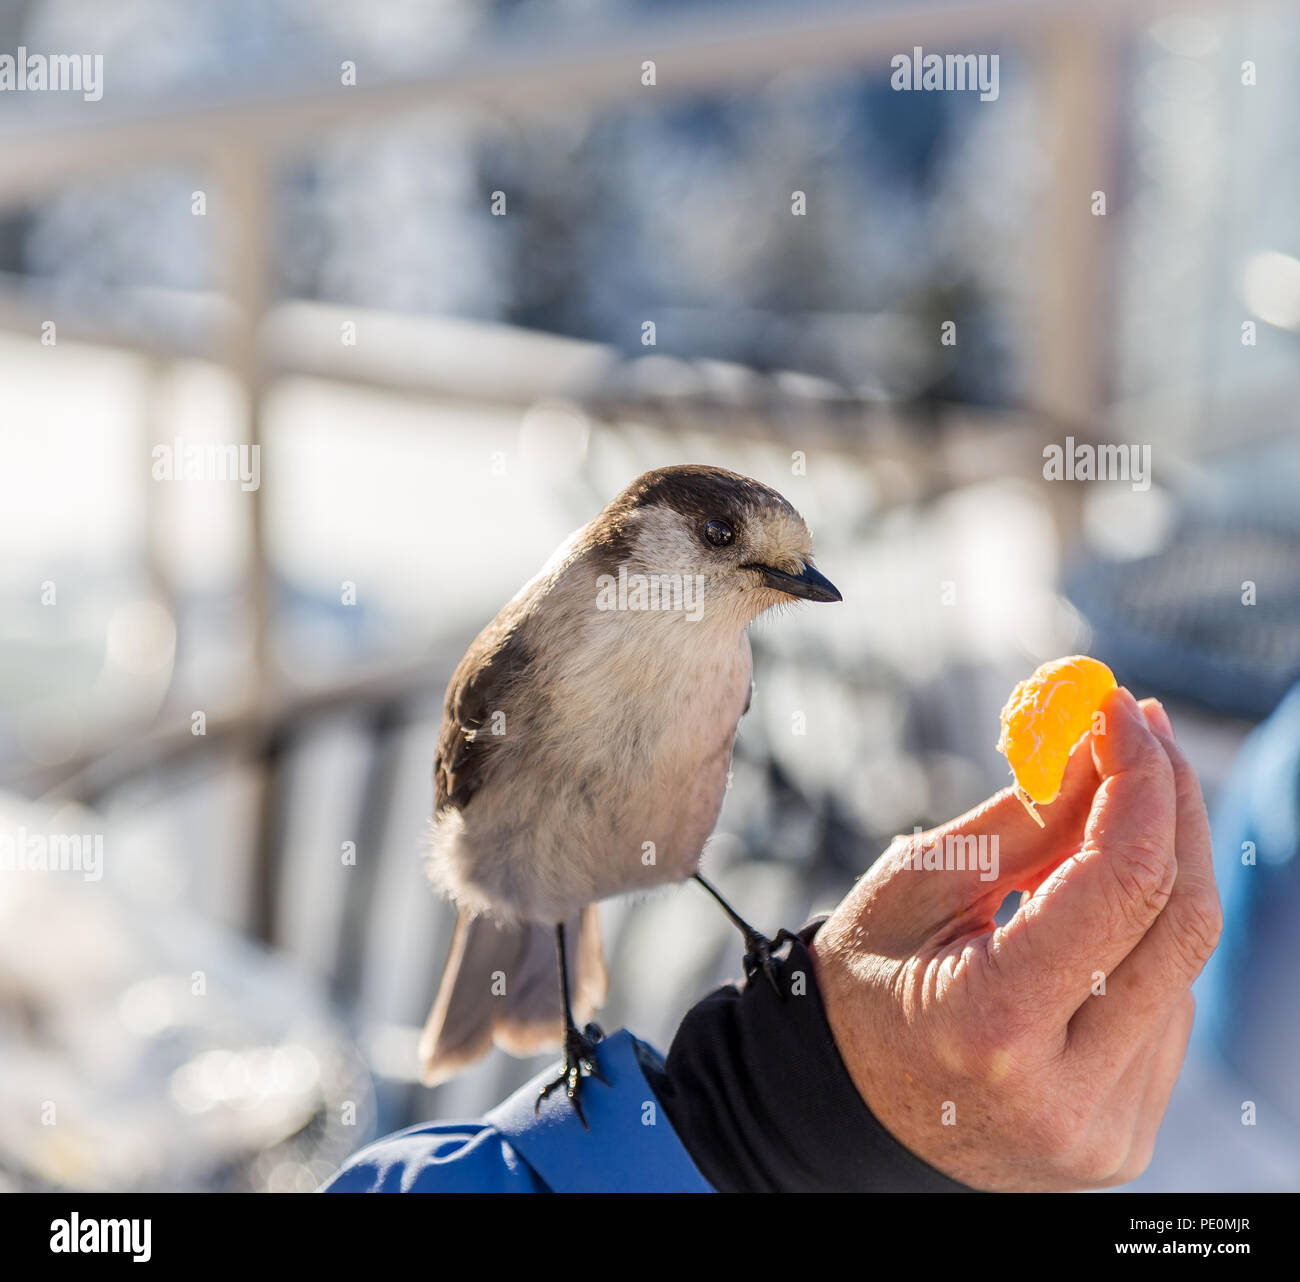 Bird perched on a hand eating a tangerine. Stock Photo